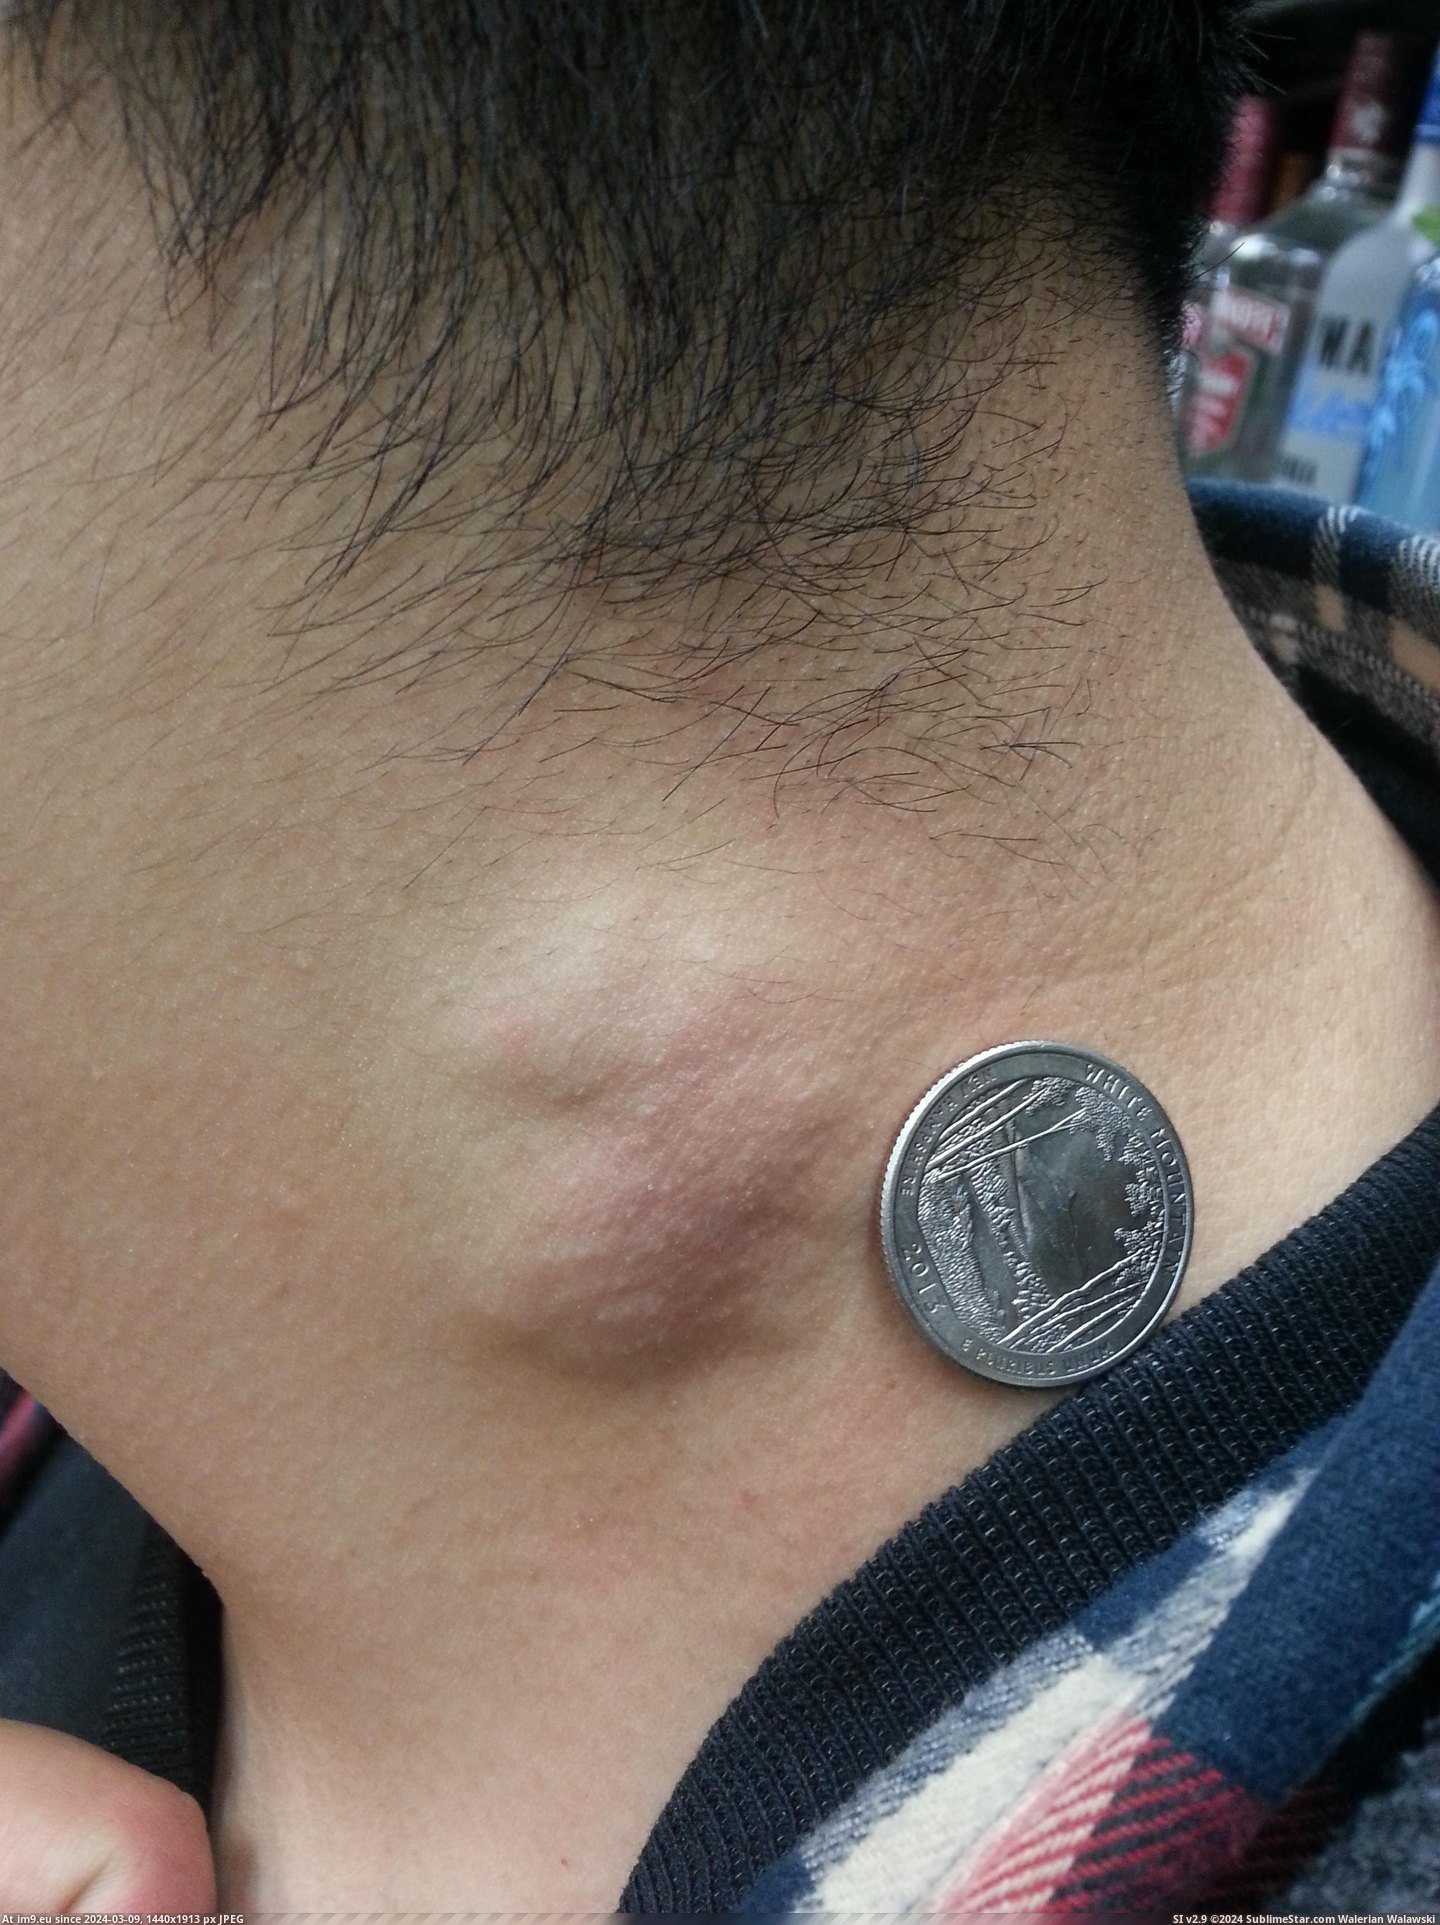 #Funny #Wtf #For #Happened #Banana #Quarter #Neck #Size #Feels #Hour #Worker [Wtf] Co-worker said my neck feels funny and an hour later this happened. Didn't have a banana so I used a quarter for size. Pic. (Obraz z album My r/WTF favs))